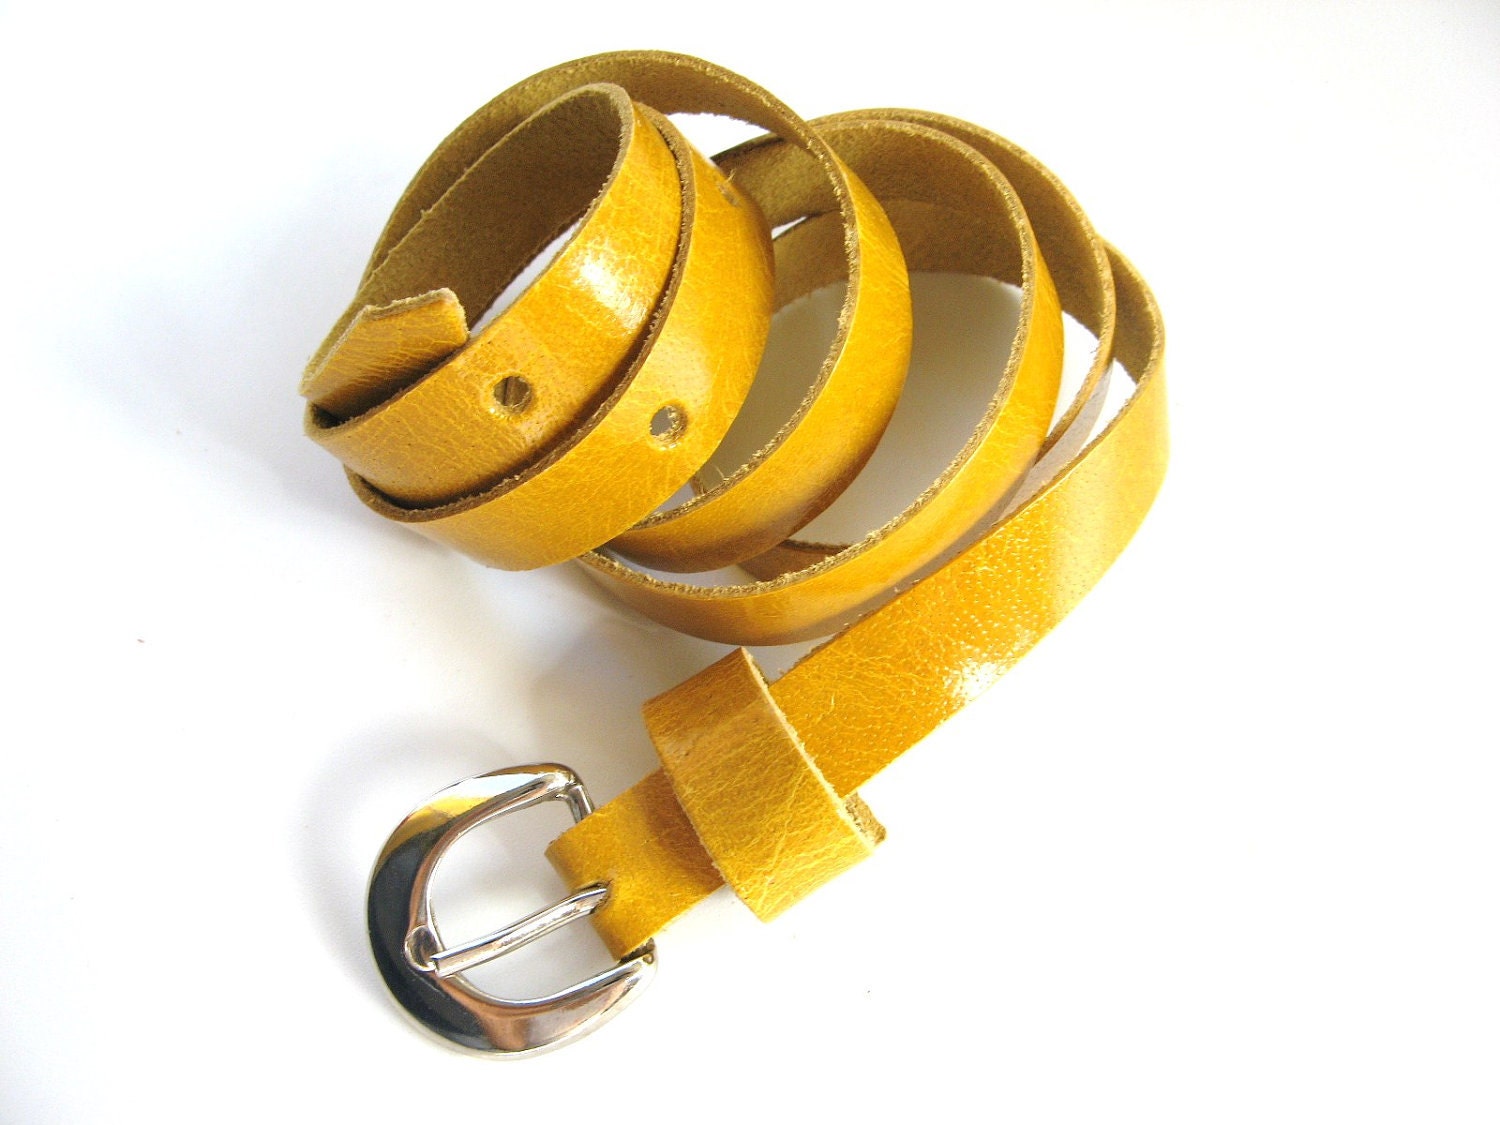 SUPER SKINNY LEATHER Belt - in Big Yellow Taxi -  Free Shipping